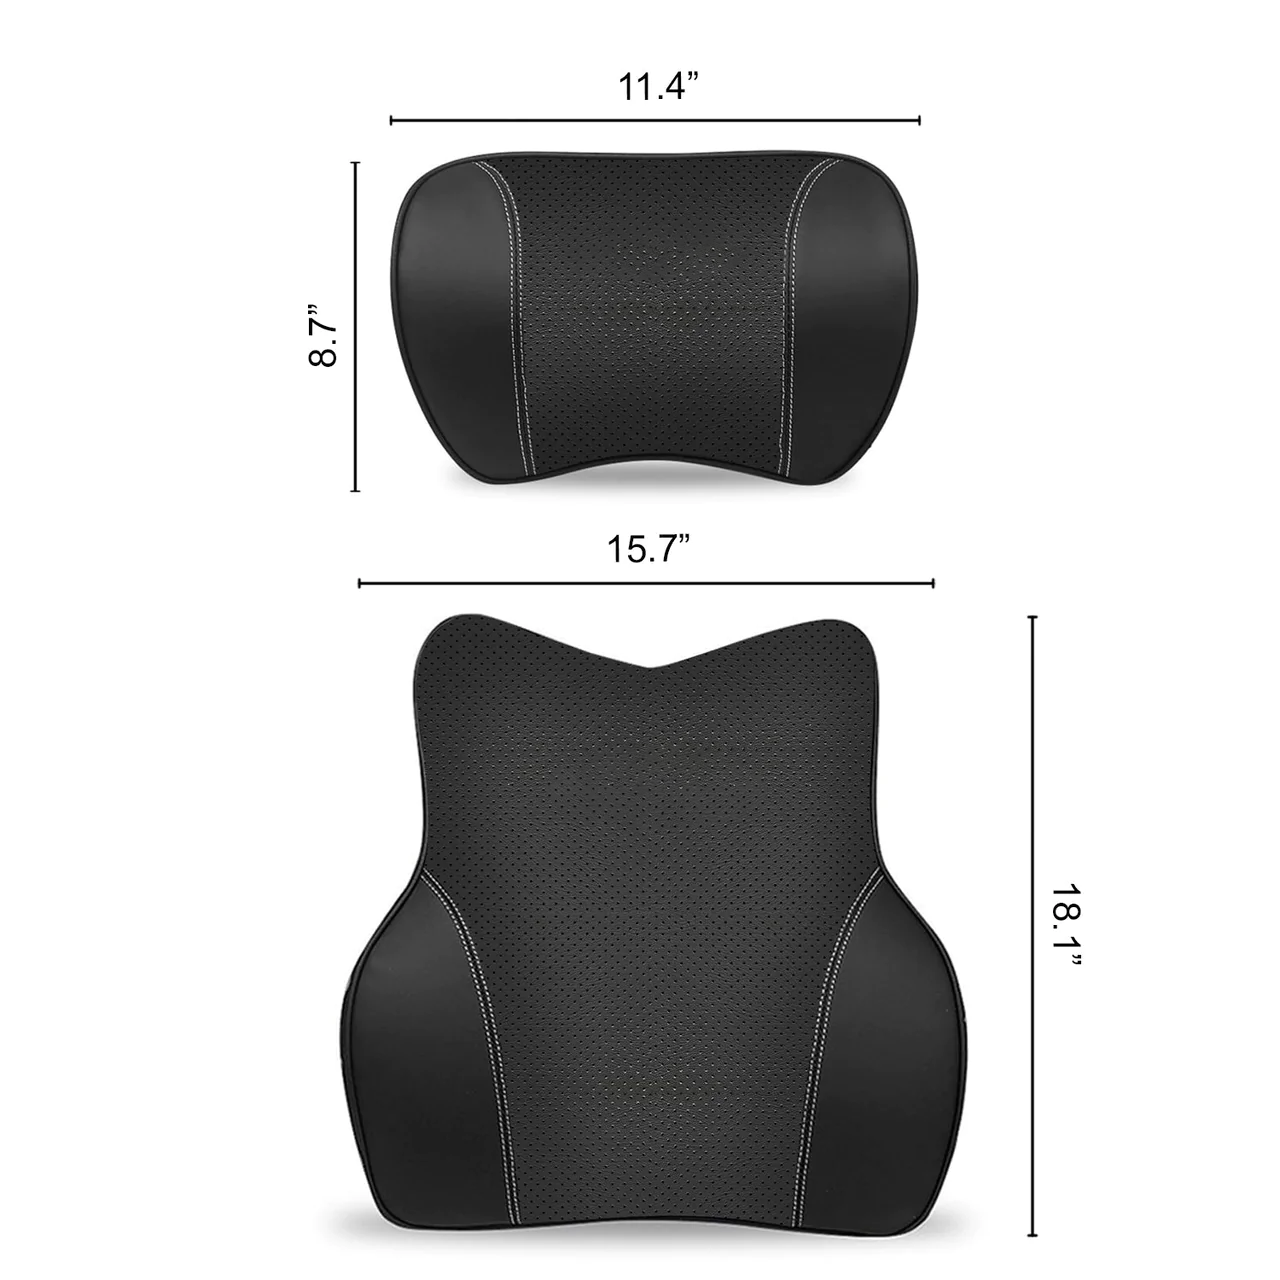 Custom Text For Car Headrest Neck Pillow and Lumbar Support Back Cushion Kit, Compatible with All Cars, Memory Foam Erognomic Design Universal Fit Muscle Pain and Tension Relief for Car Seat LI13992